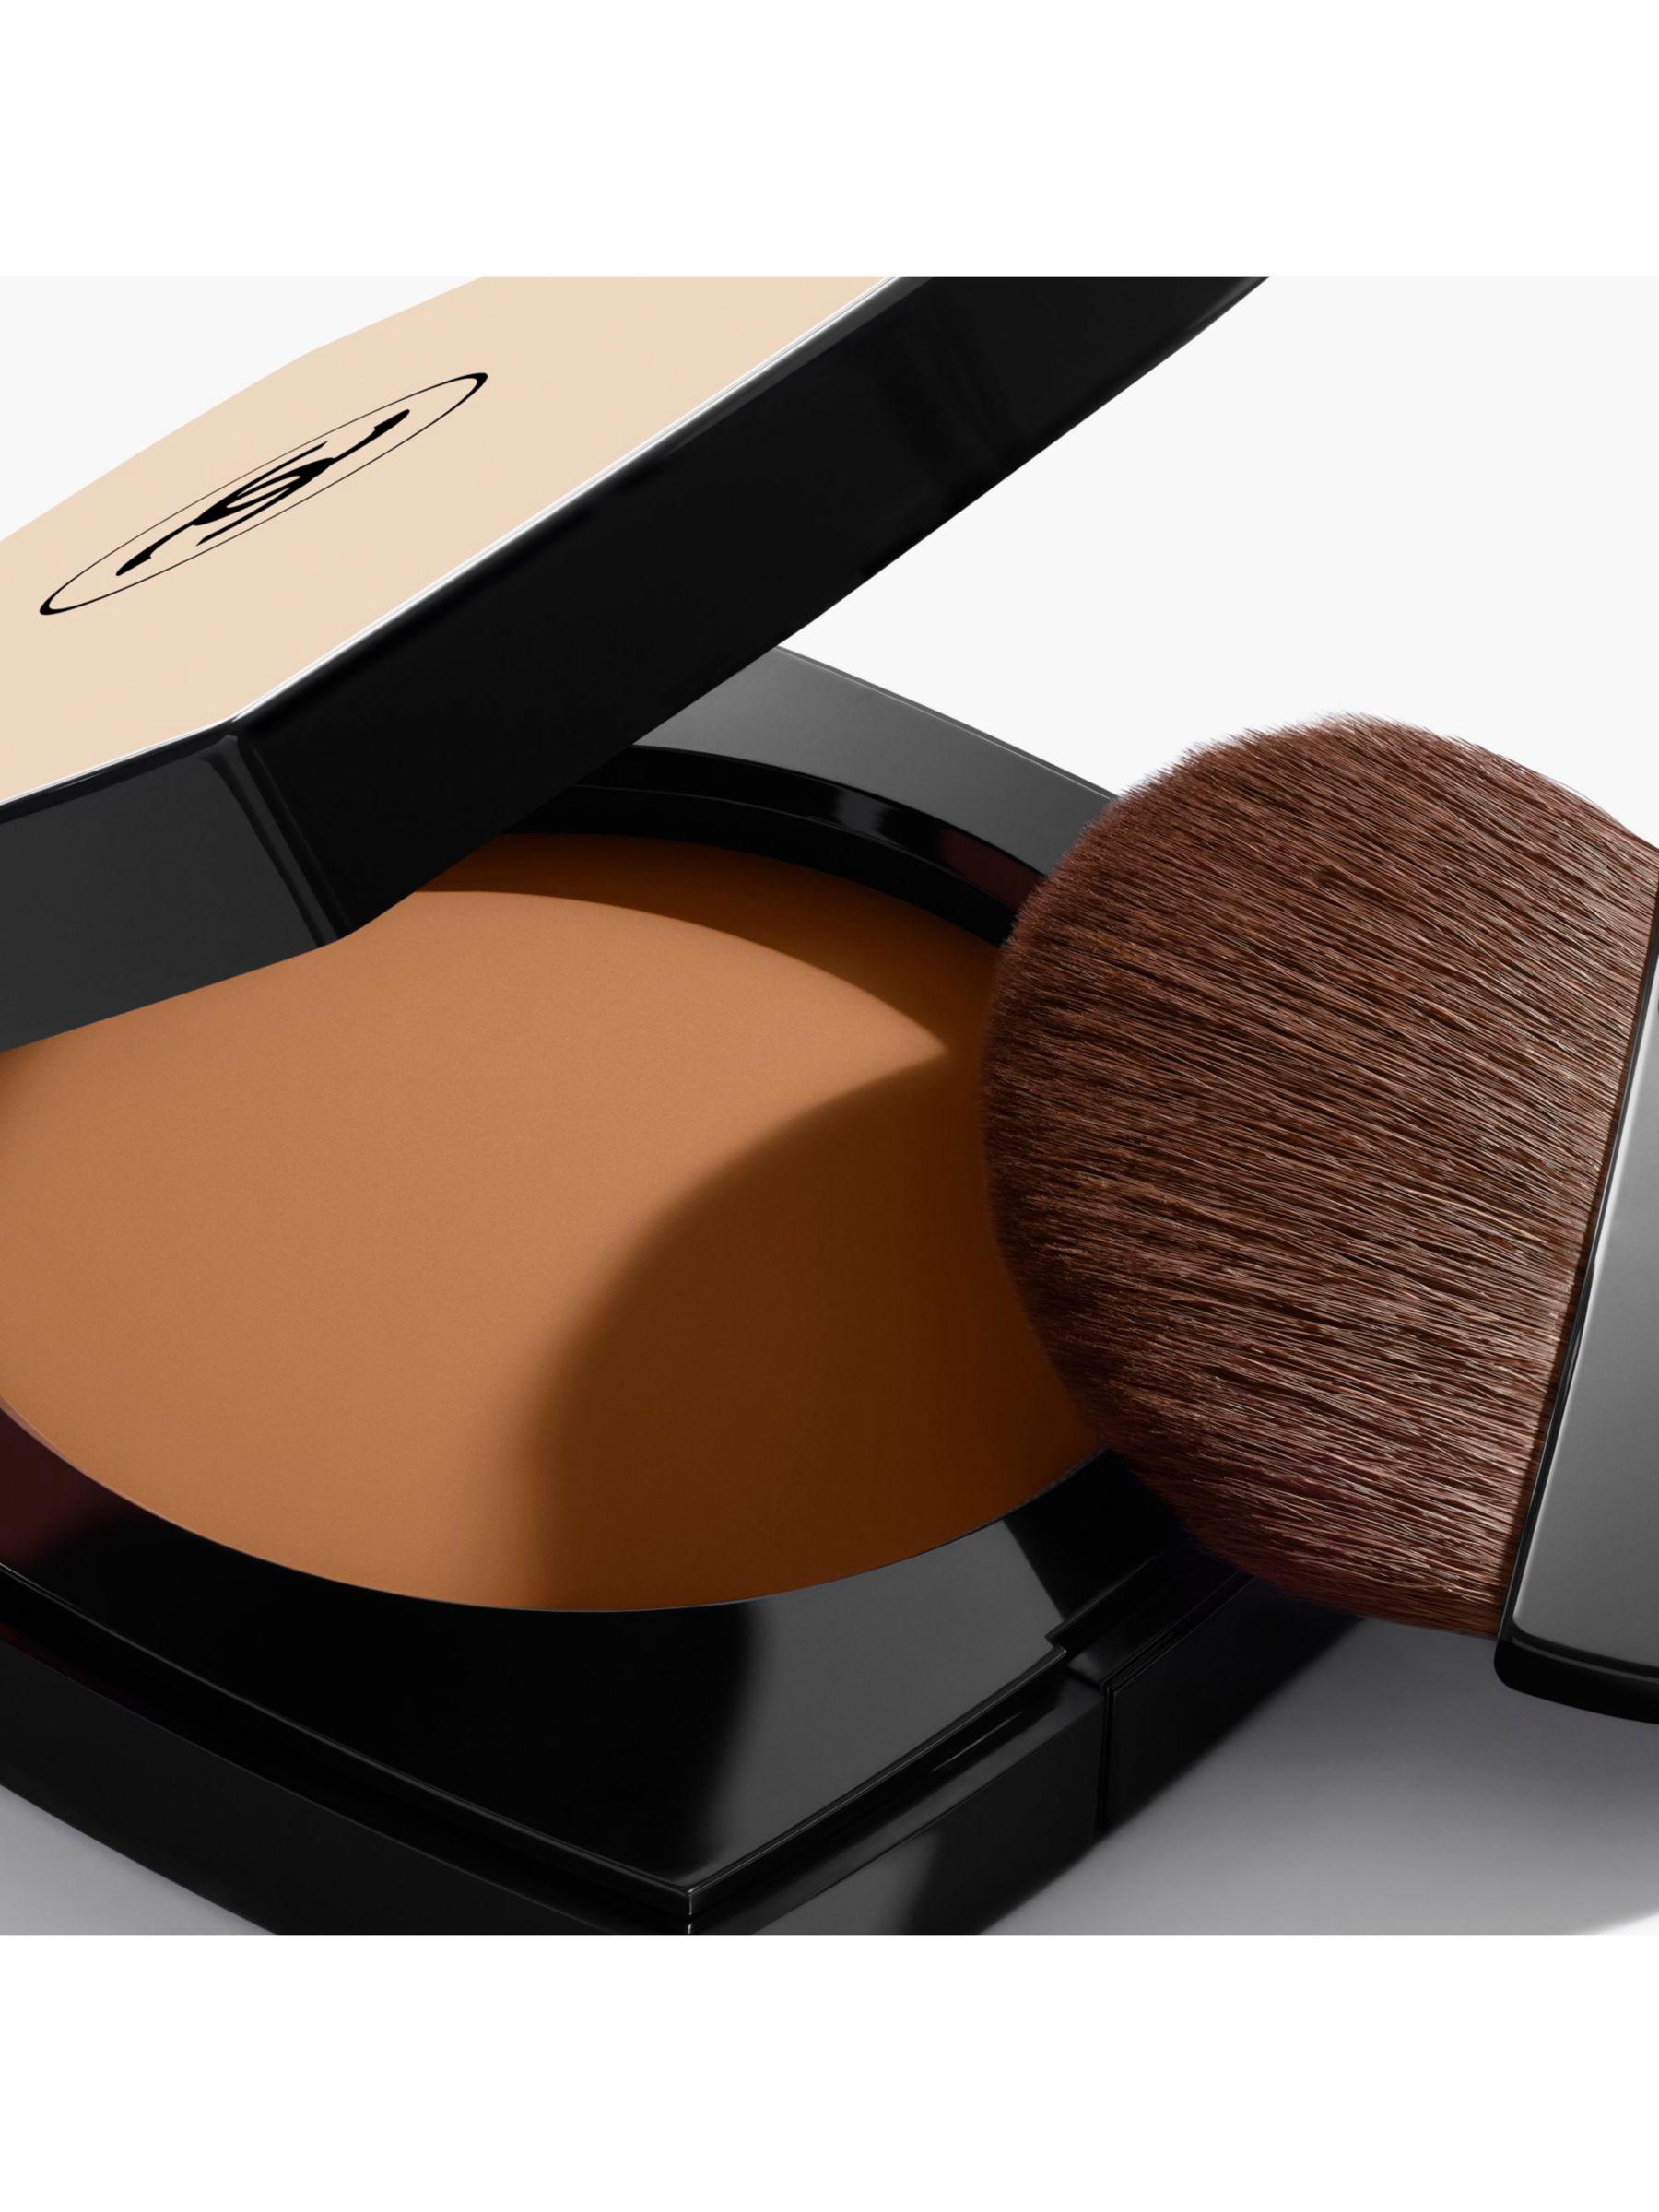 CHANEL Les Beiges Healthy Glow Powder, B60 at John Lewis & Partners